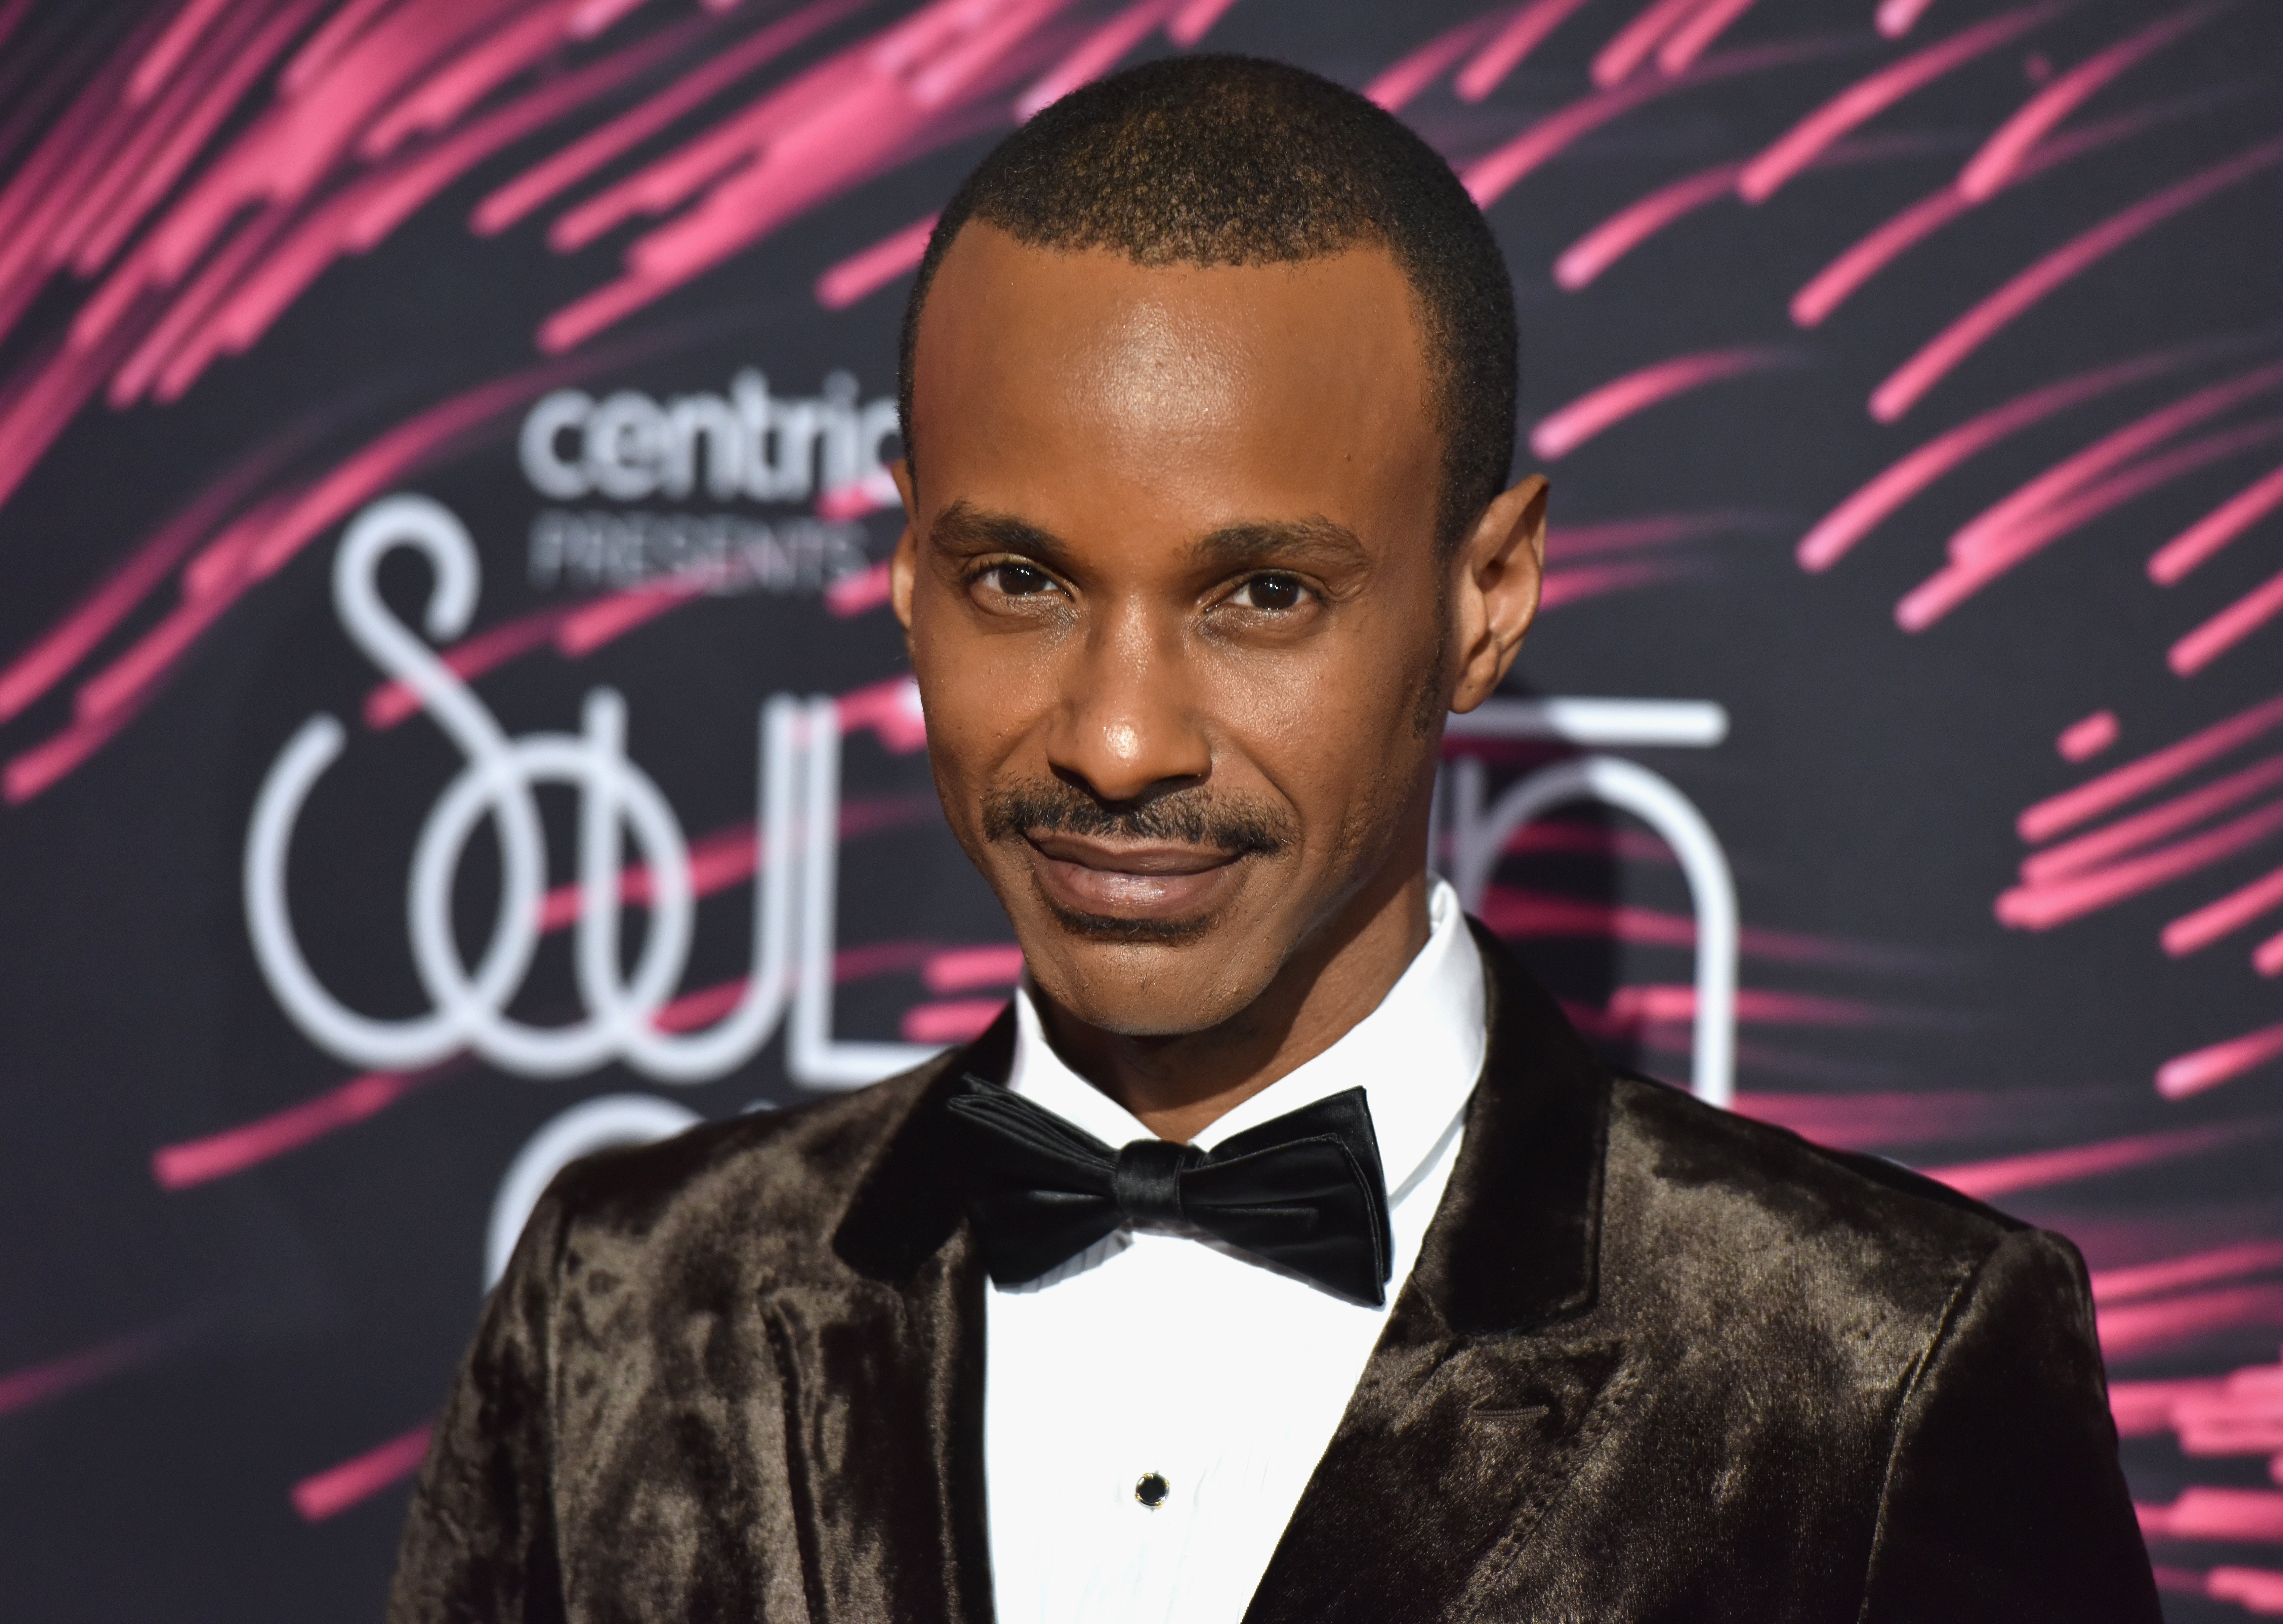 Tevin Campbell at the 2015 Soul Train Music Awards on November 6, 2015 | Source: Getty Images